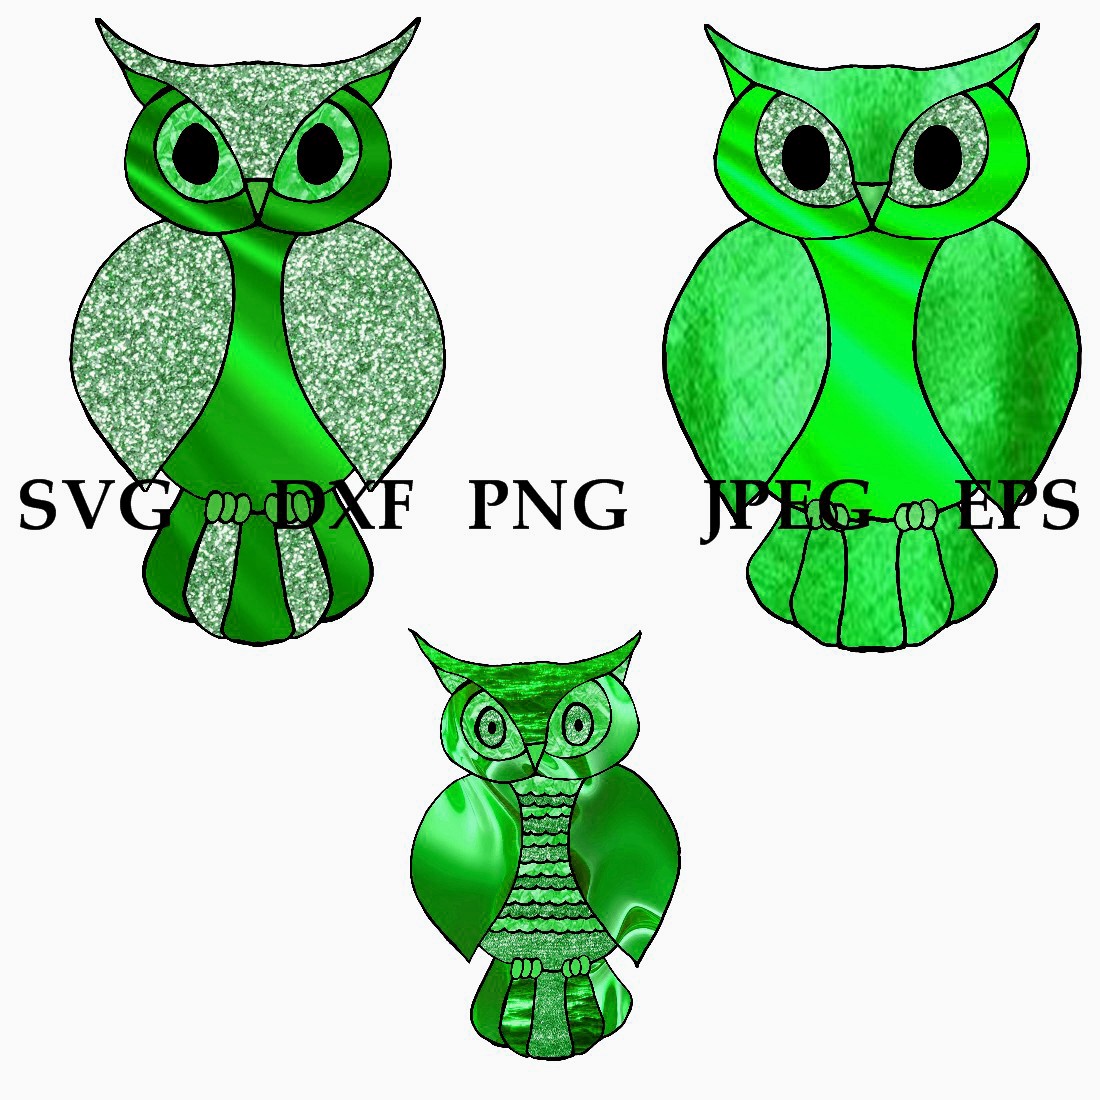 Different variants for 6 Owl DXF SVG Stickers.